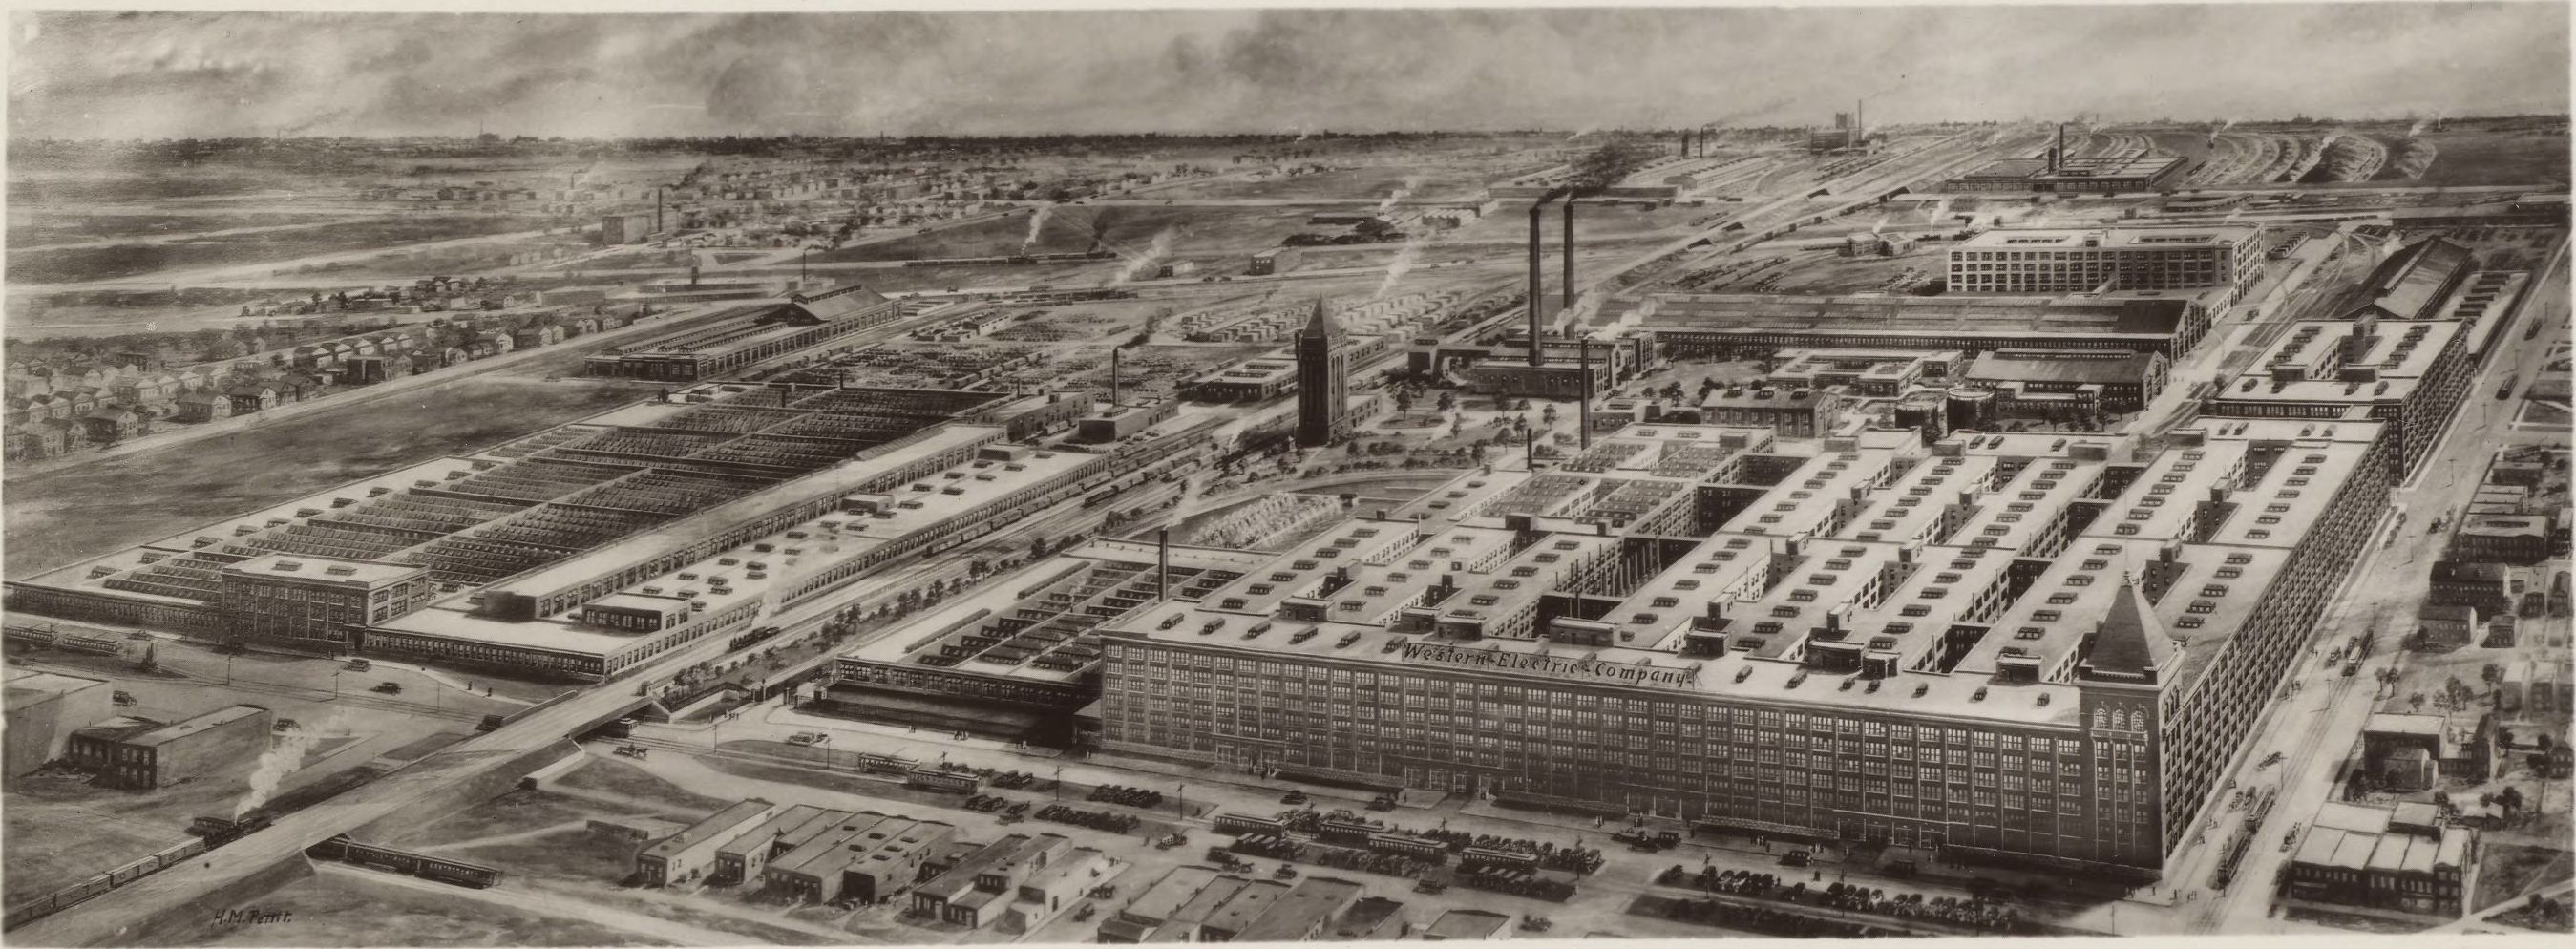 Hawthorne, Illinois Works of the Western Electric Company, 1925.jpg